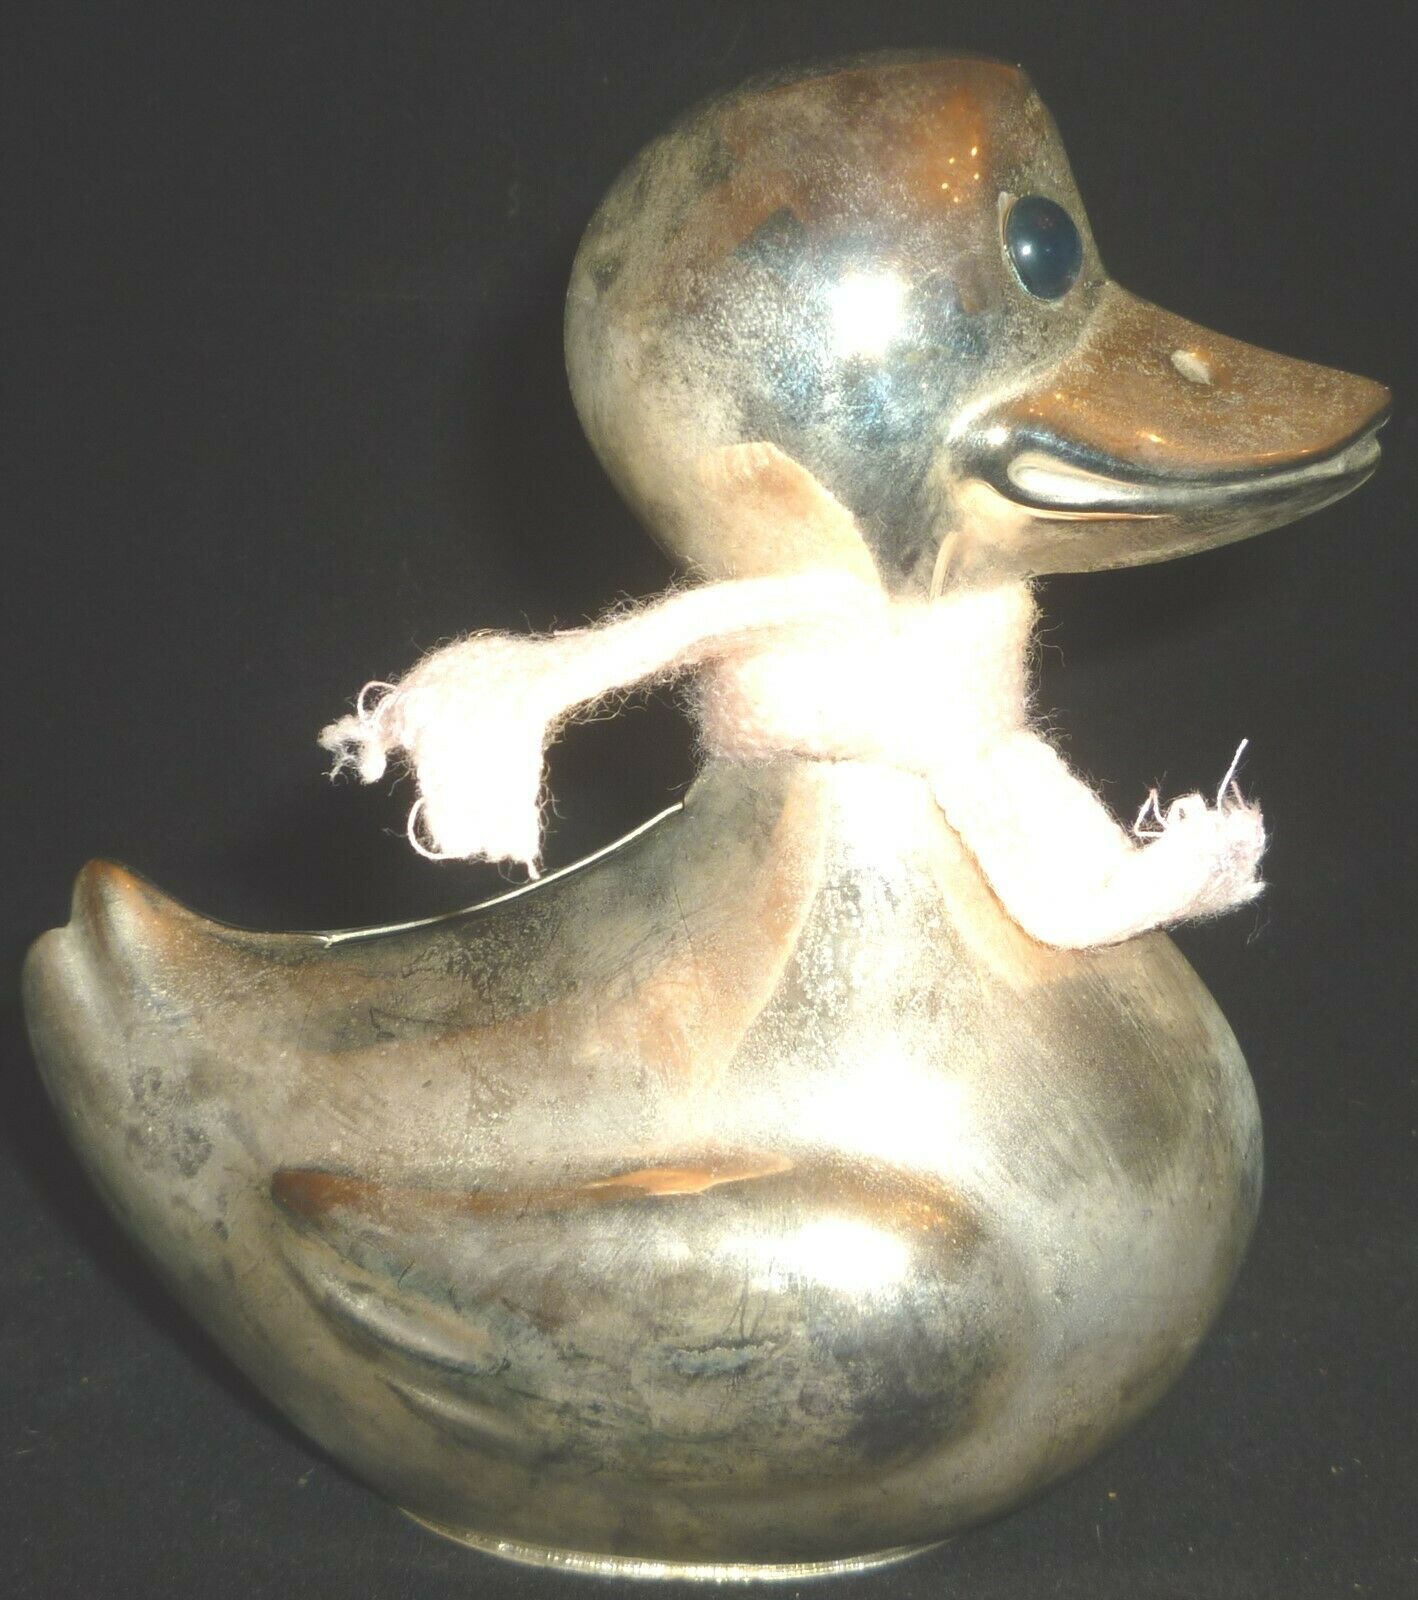 Primary image for VINTAGE SILVERPLATED DUCK COIN BAN FIGURAL PIGGY STILL BANK